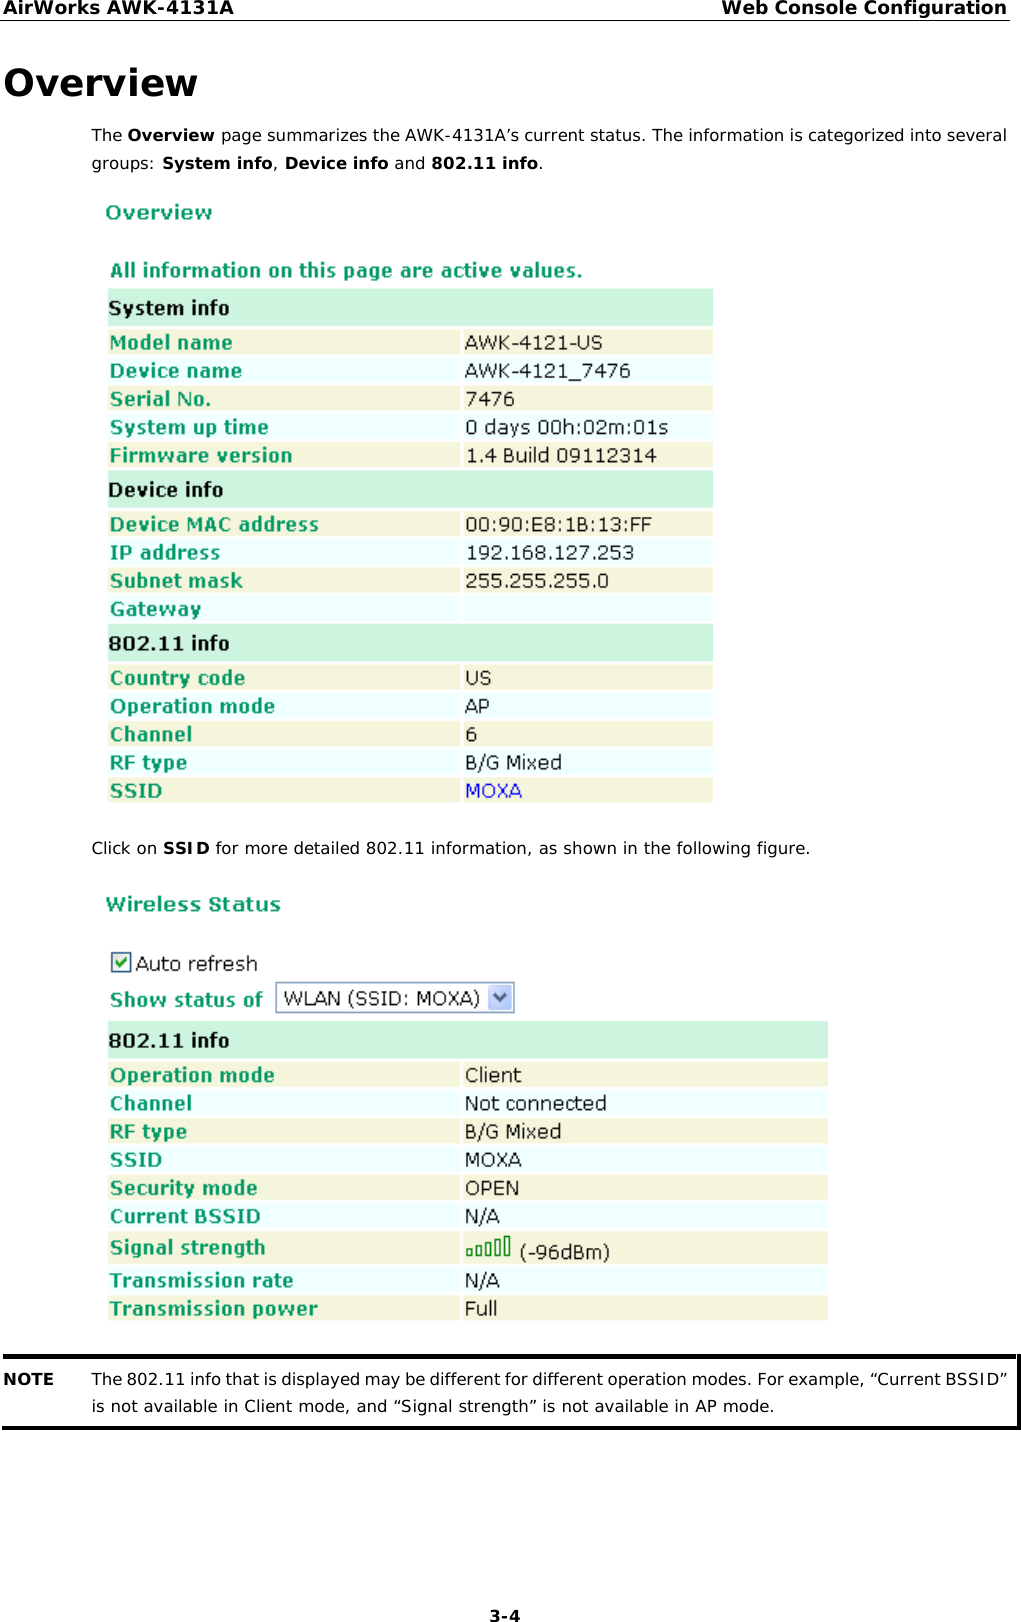 AirWorks AWK-4131A Web Console Configuration  3-4 Overview The Overview page summarizes the AWK-4131A’s current status. The information is categorized into several groups: System info, Device info and 802.11 info.  Click on SSID for more detailed 802.11 information, as shown in the following figure.  NOTE The 802.11 info that is displayed may be different for different operation modes. For example, “Current BSSID” is not available in Client mode, and “Signal strength” is not available in AP mode.       